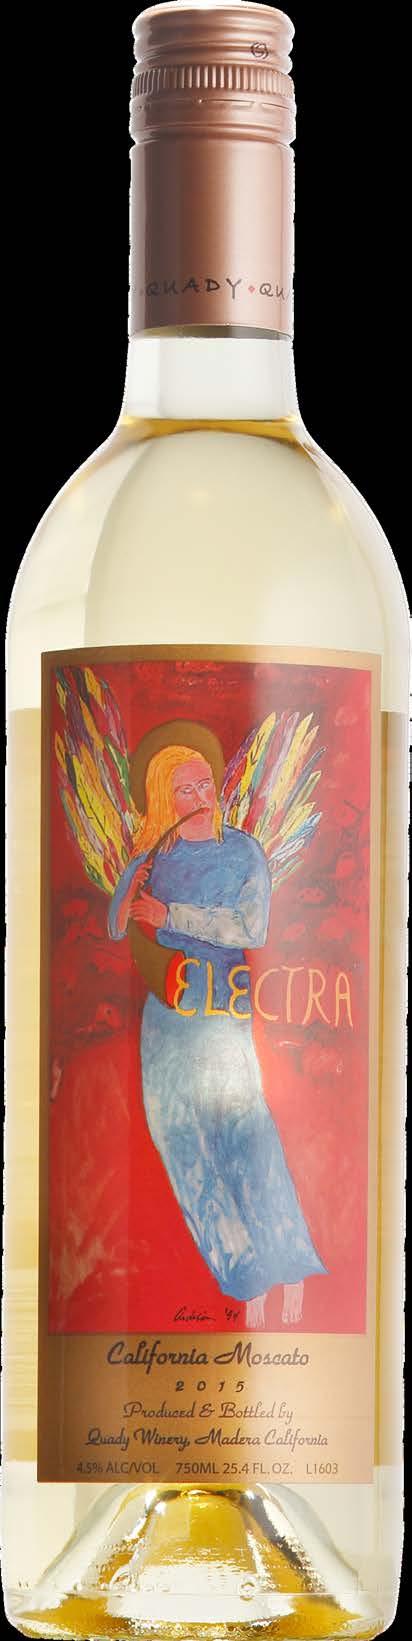 Best Buy 90 POINTS 2015 ELECTRA "Beautiful rose petal, orange blossom and honey flavors practically leap out of the glass as this sweet, lightly sparkling and nicely